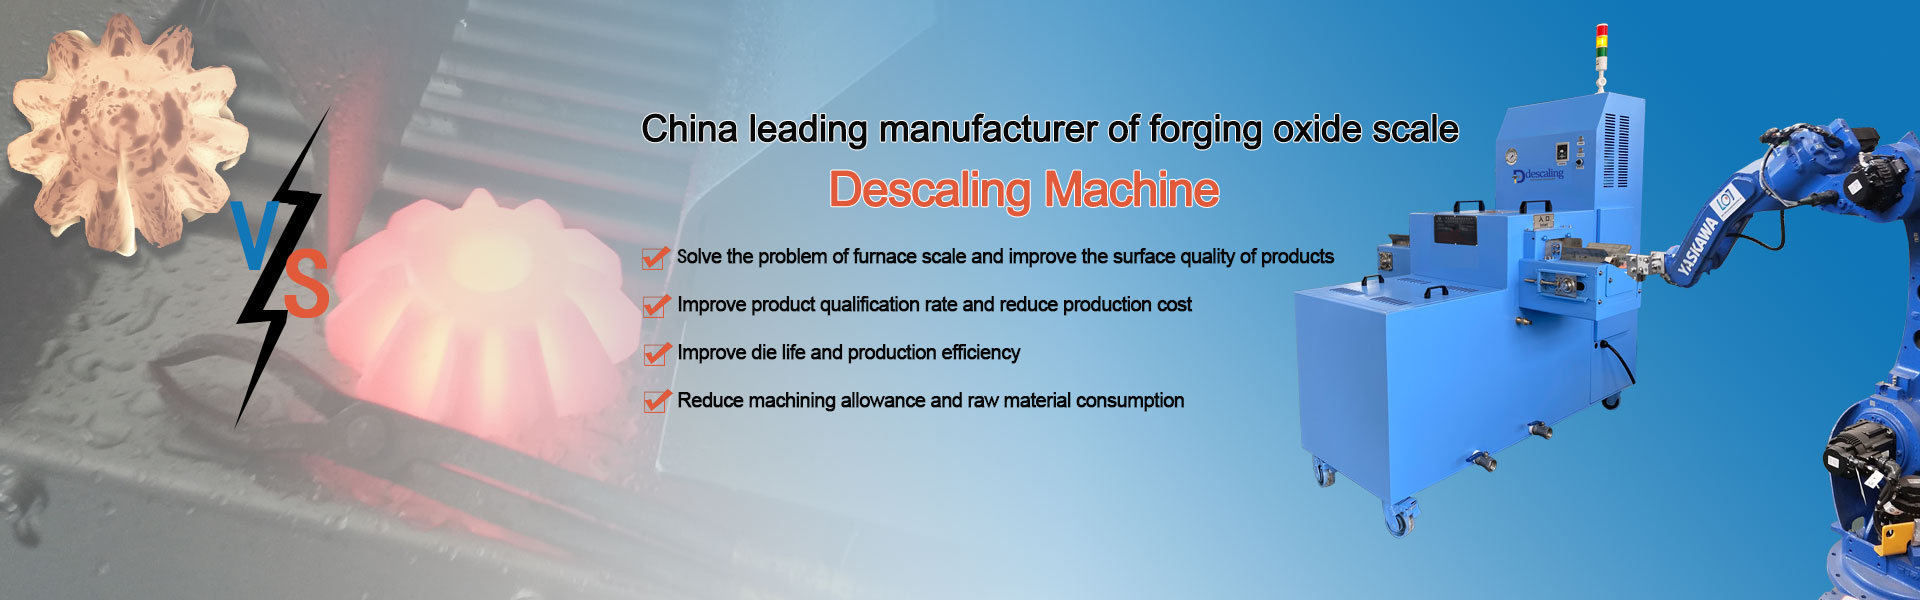 Fully Automatic Forging Oxide Scale Descaling Machine